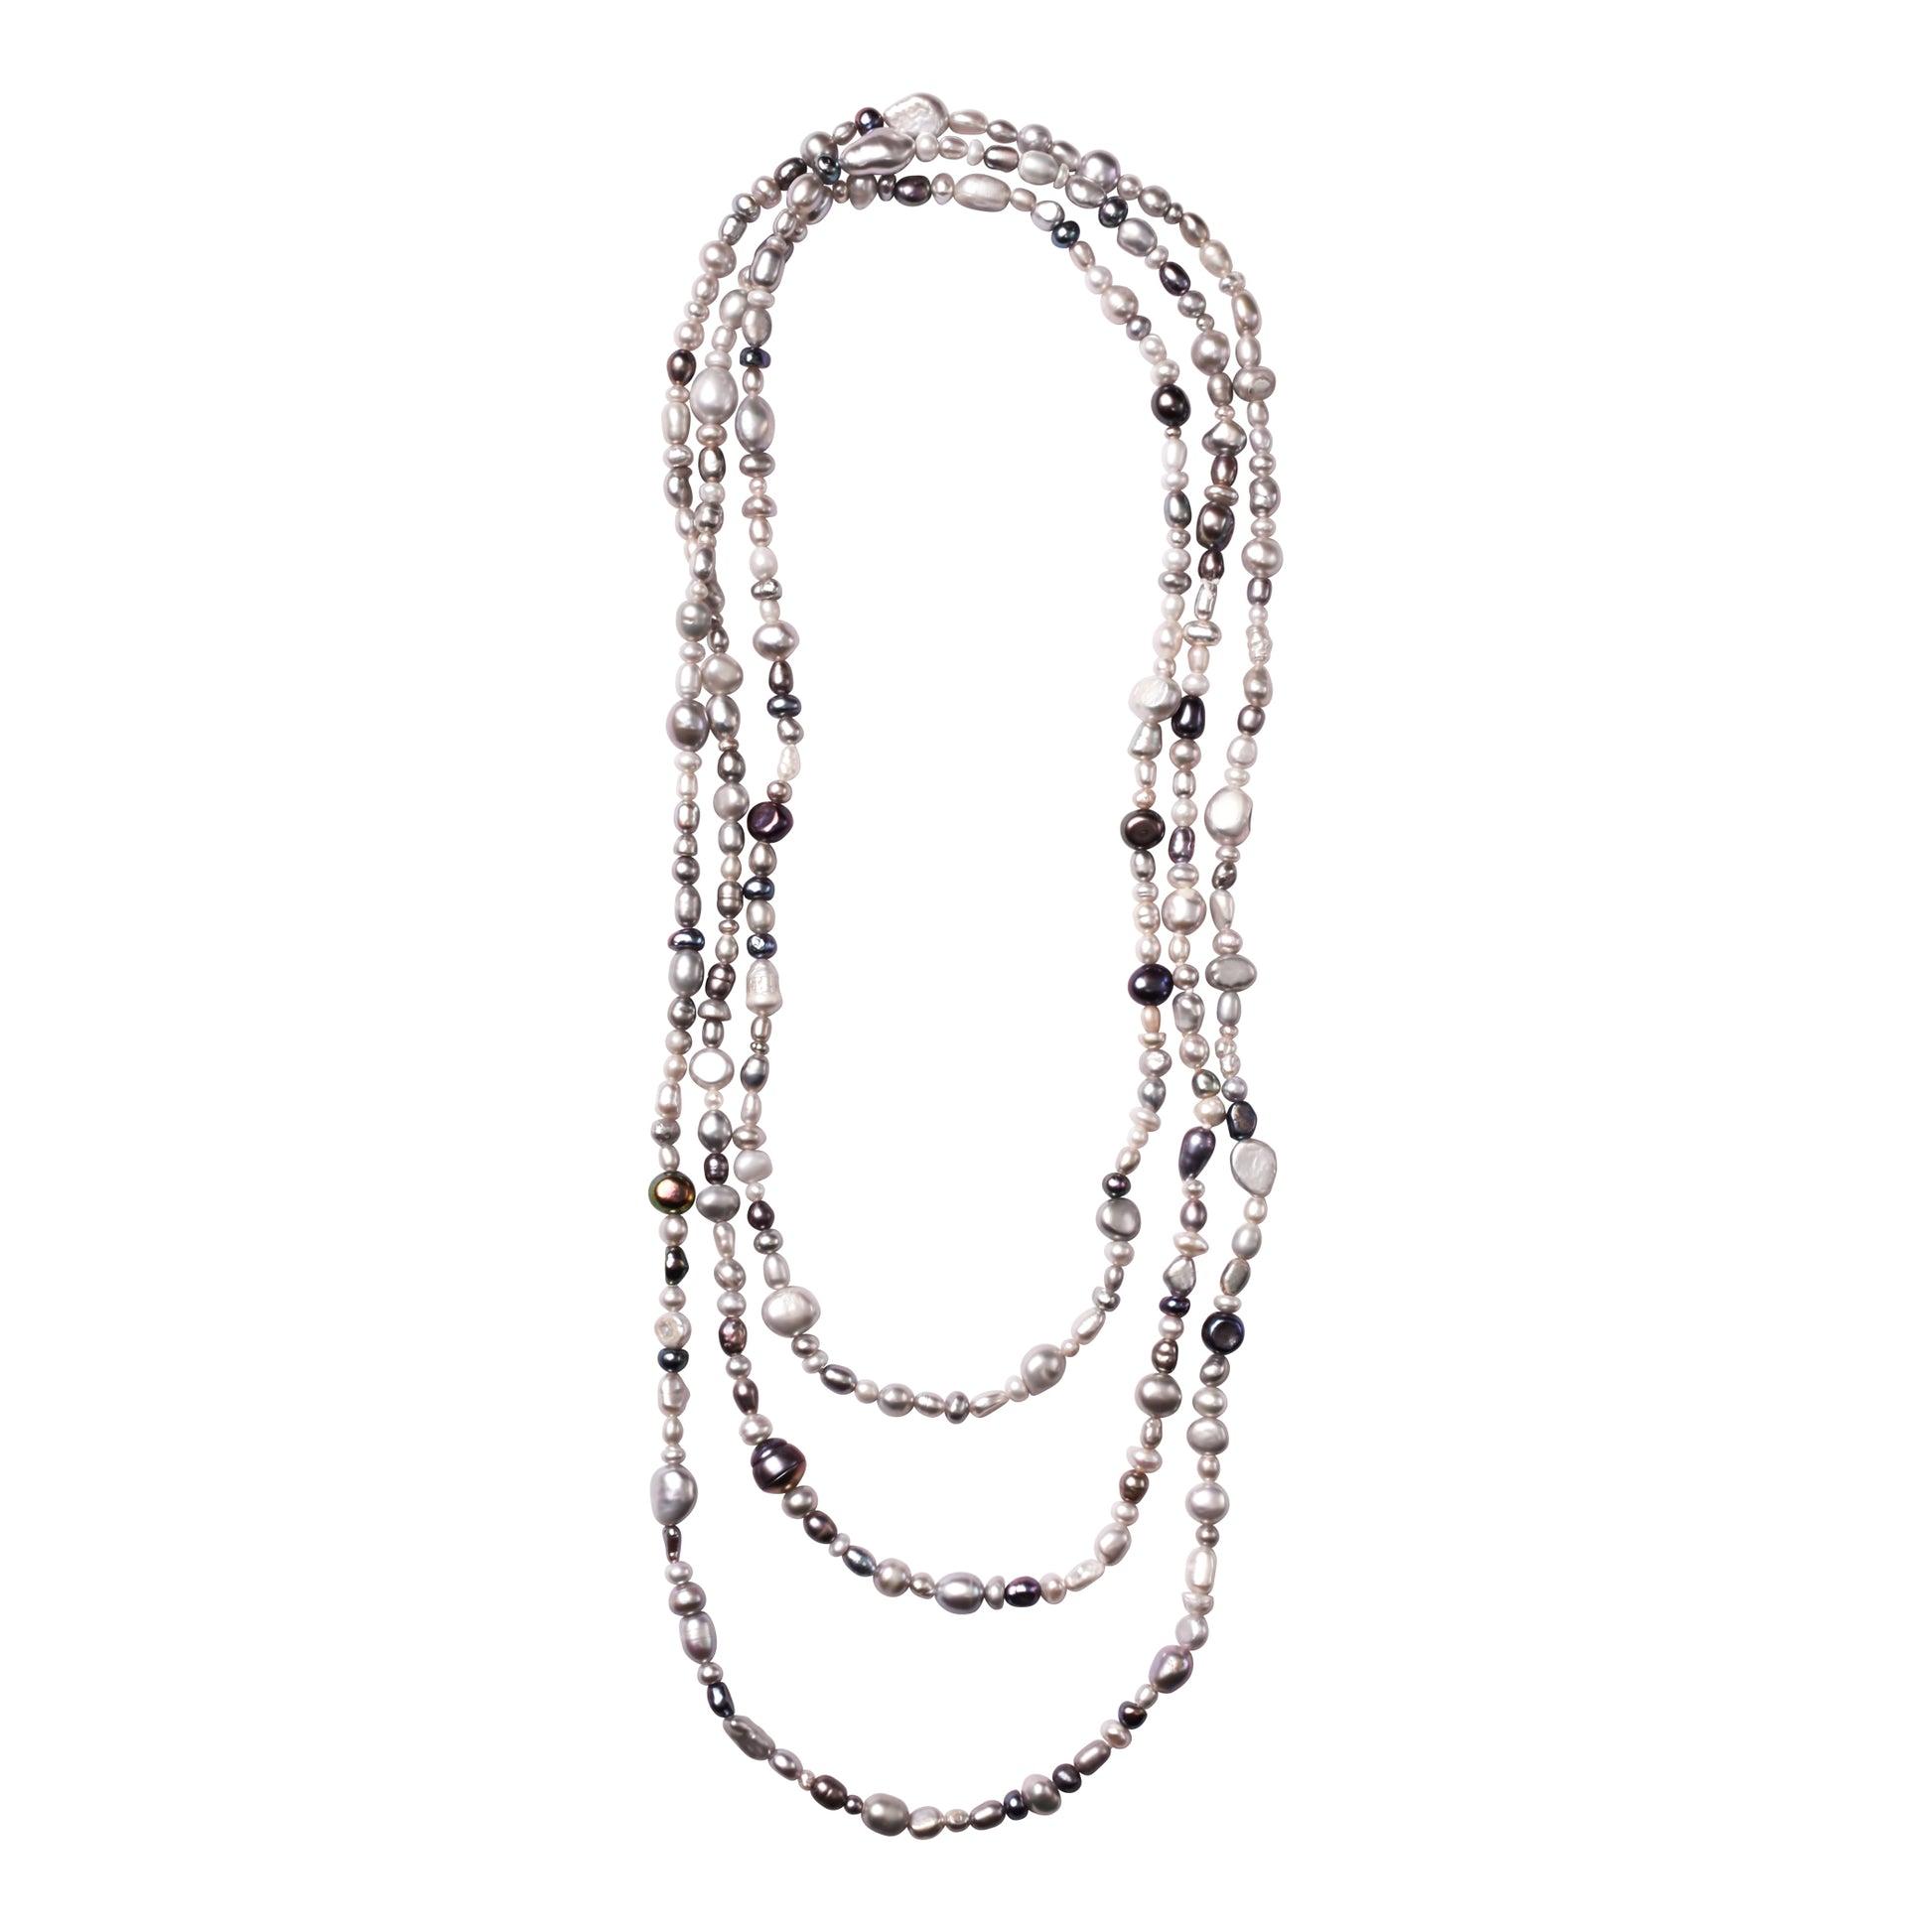 Endless Silver Mixed Freshwater Pearls Necklace 72"